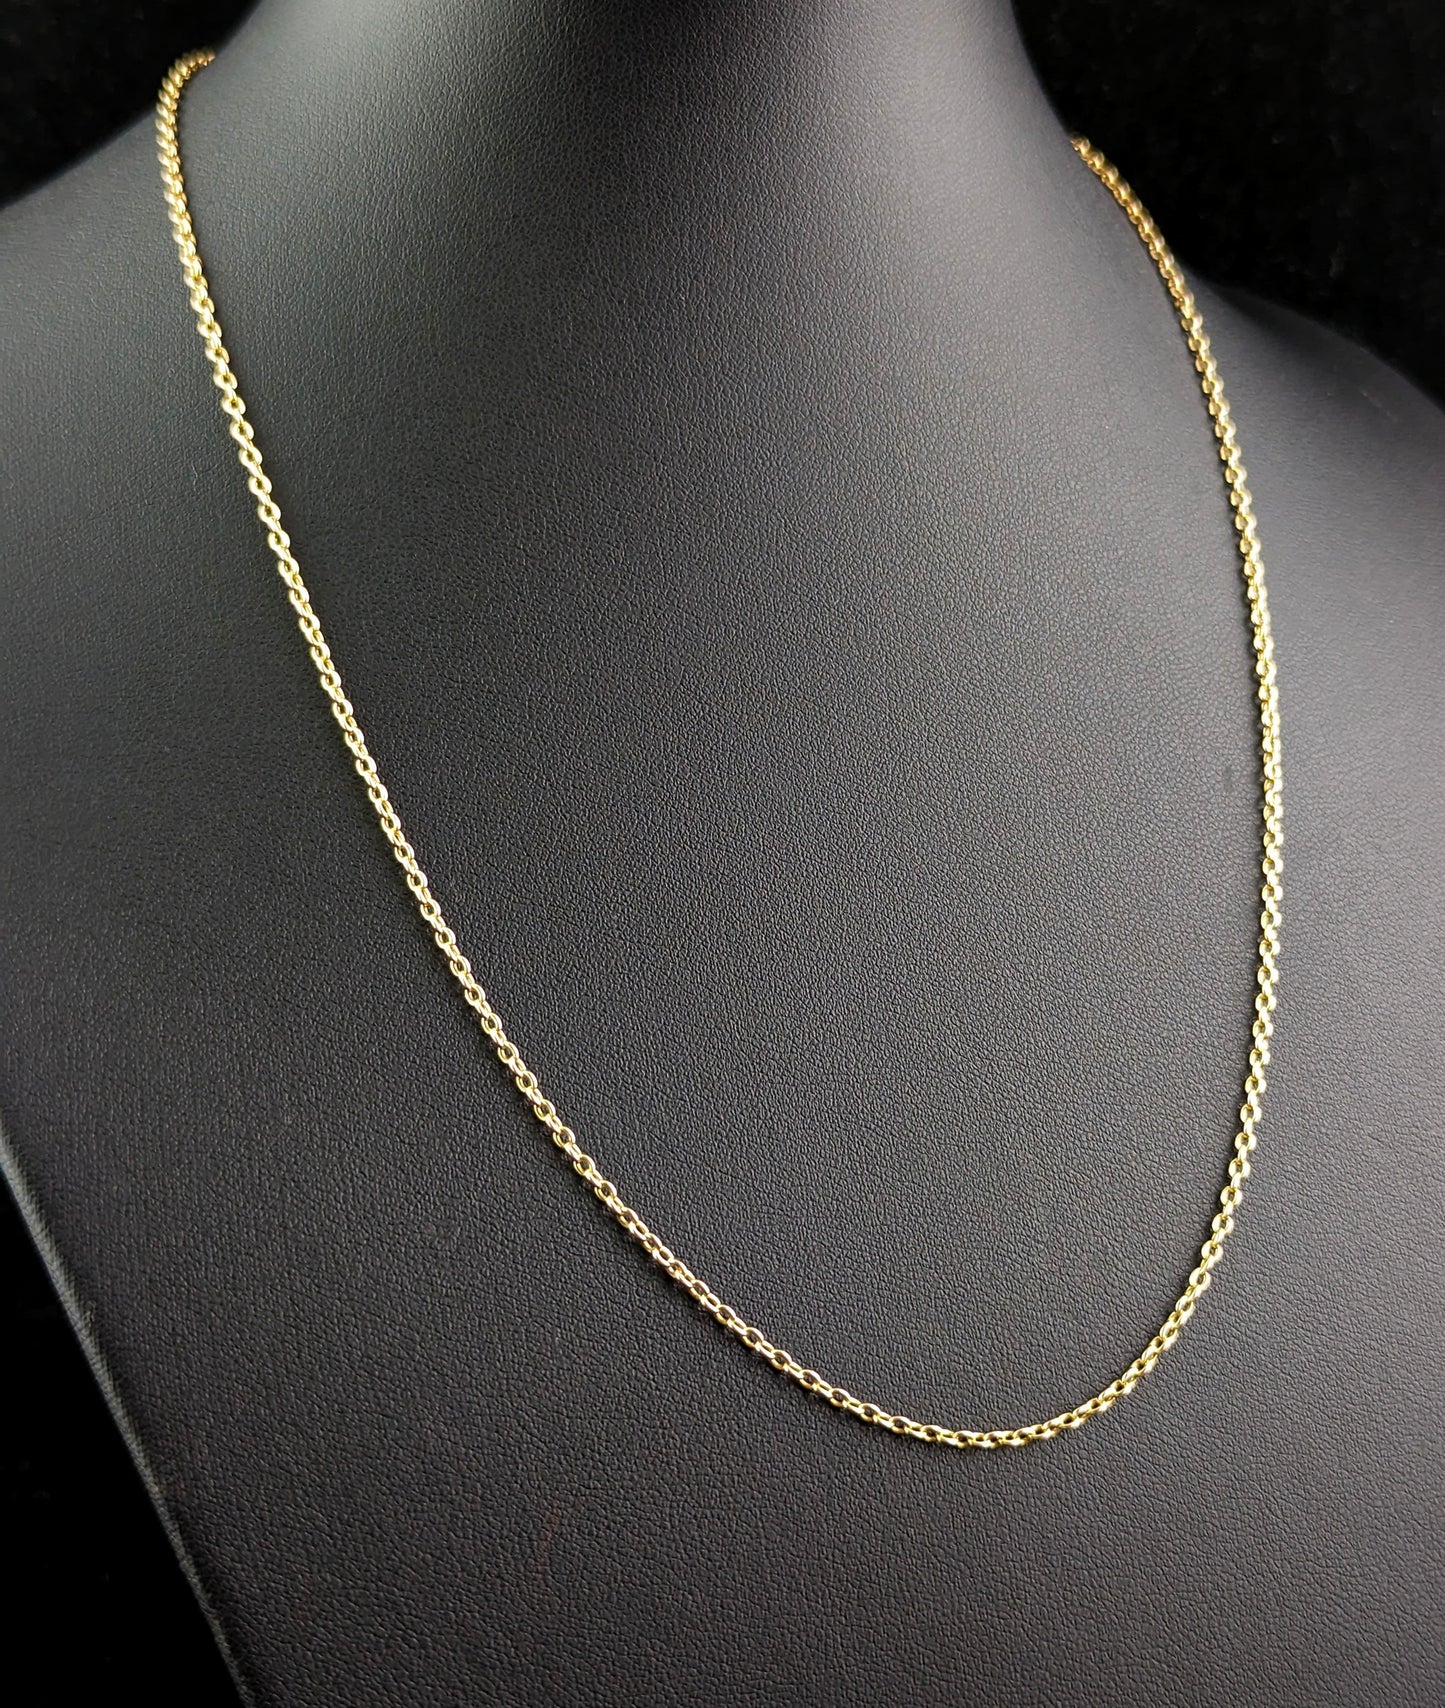 Antique 15ct yellow gold chain necklace, rolo link, Edwardian